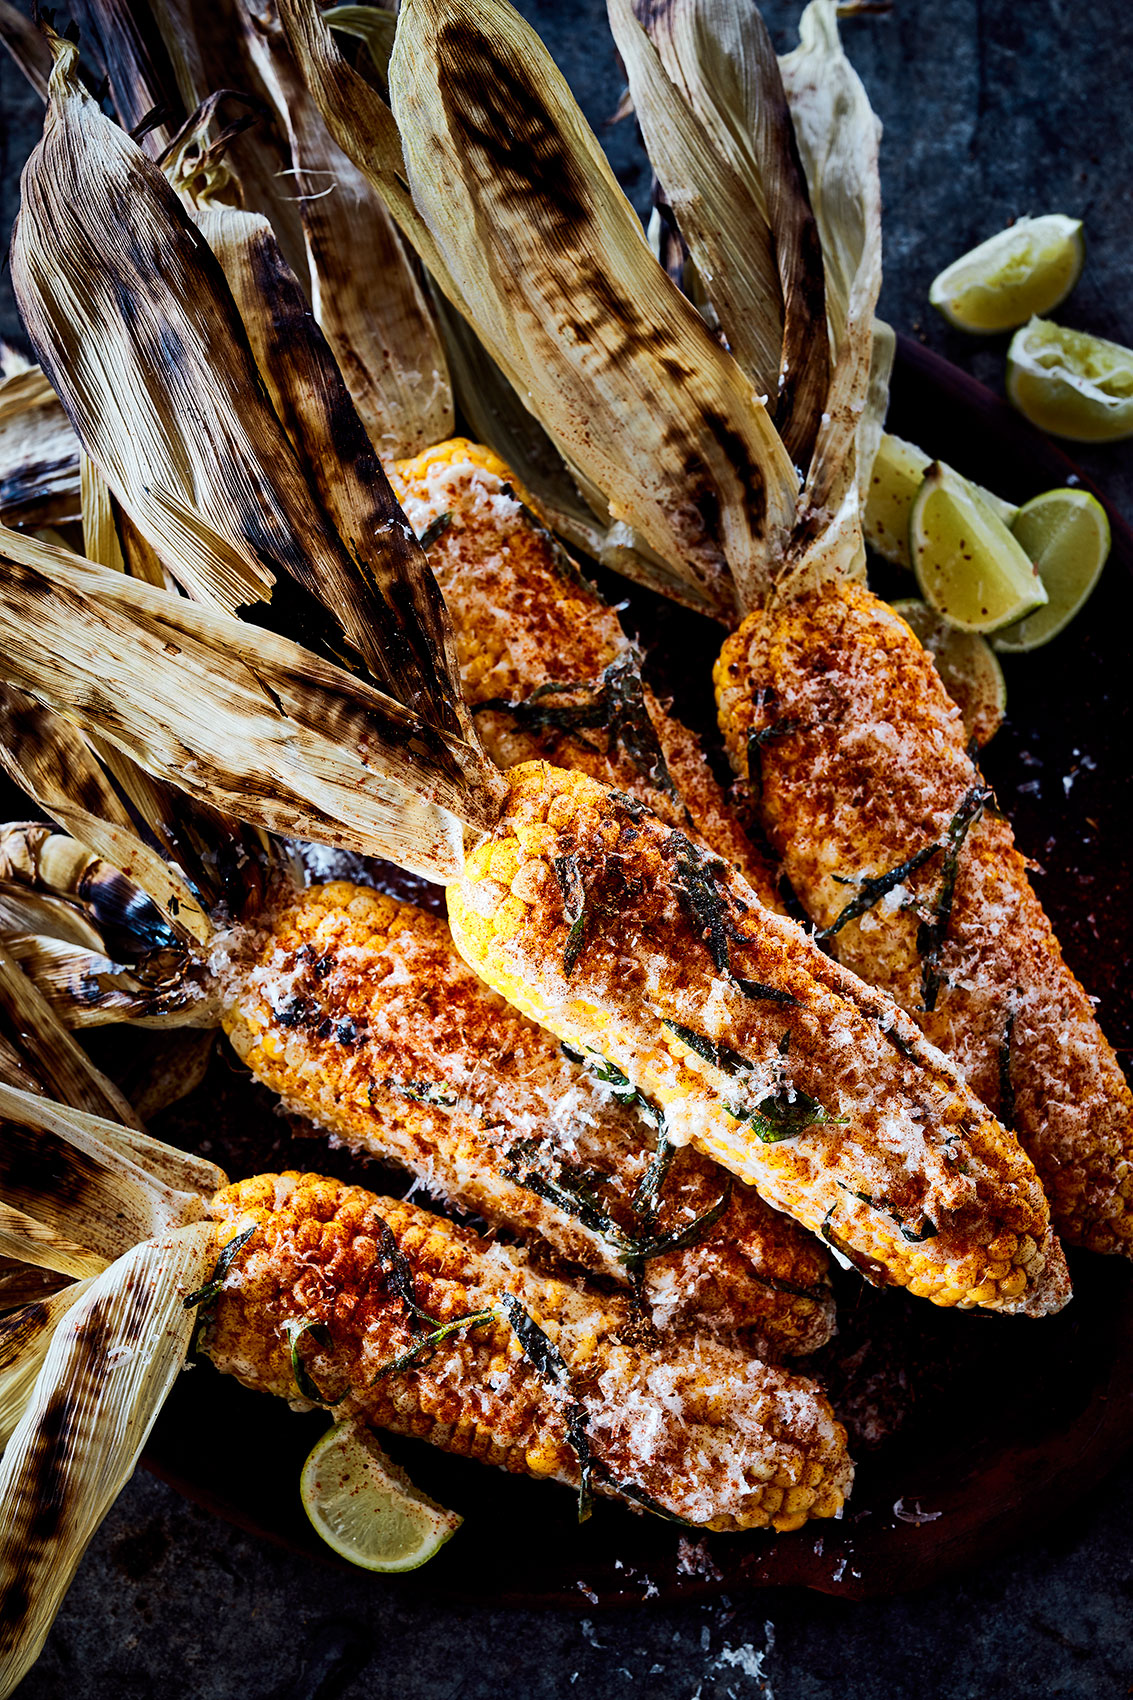 Shared Kitchen • Grilled Corn with Salt, Herbs & Lime Wedges • Lifestyle & Editorial Food Photography